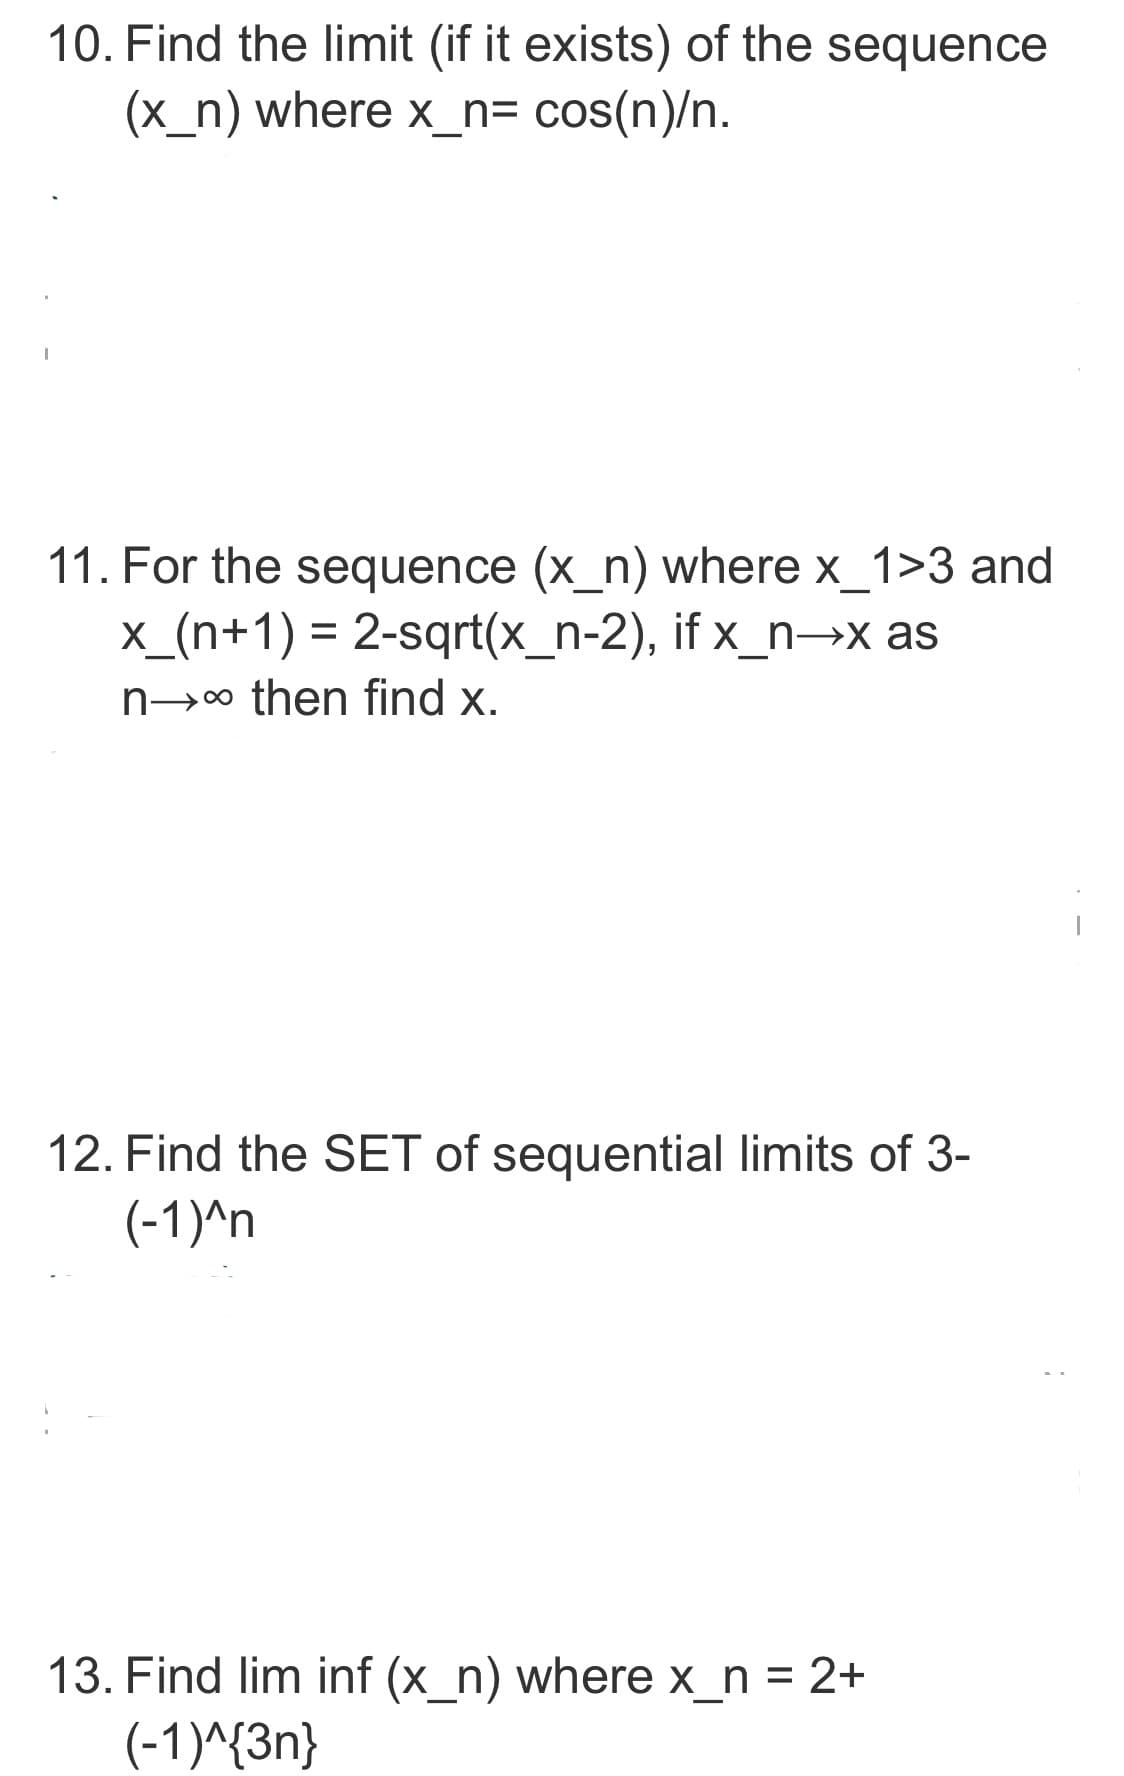 10. Find the limit (if it exists) of the sequence
(x_n) where x_n= cos(n)/n.
11. For the sequence (x_n) where x_1>3 and
x_(n+1) = 2-sqrt(x_n-2), if x_n→x as
n→∞ then find x.
12. Find the SET of sequential limits of 3-
(-1)^n
13. Find lim inf (x_n) where x_n = 2+
(-1)^{3n}